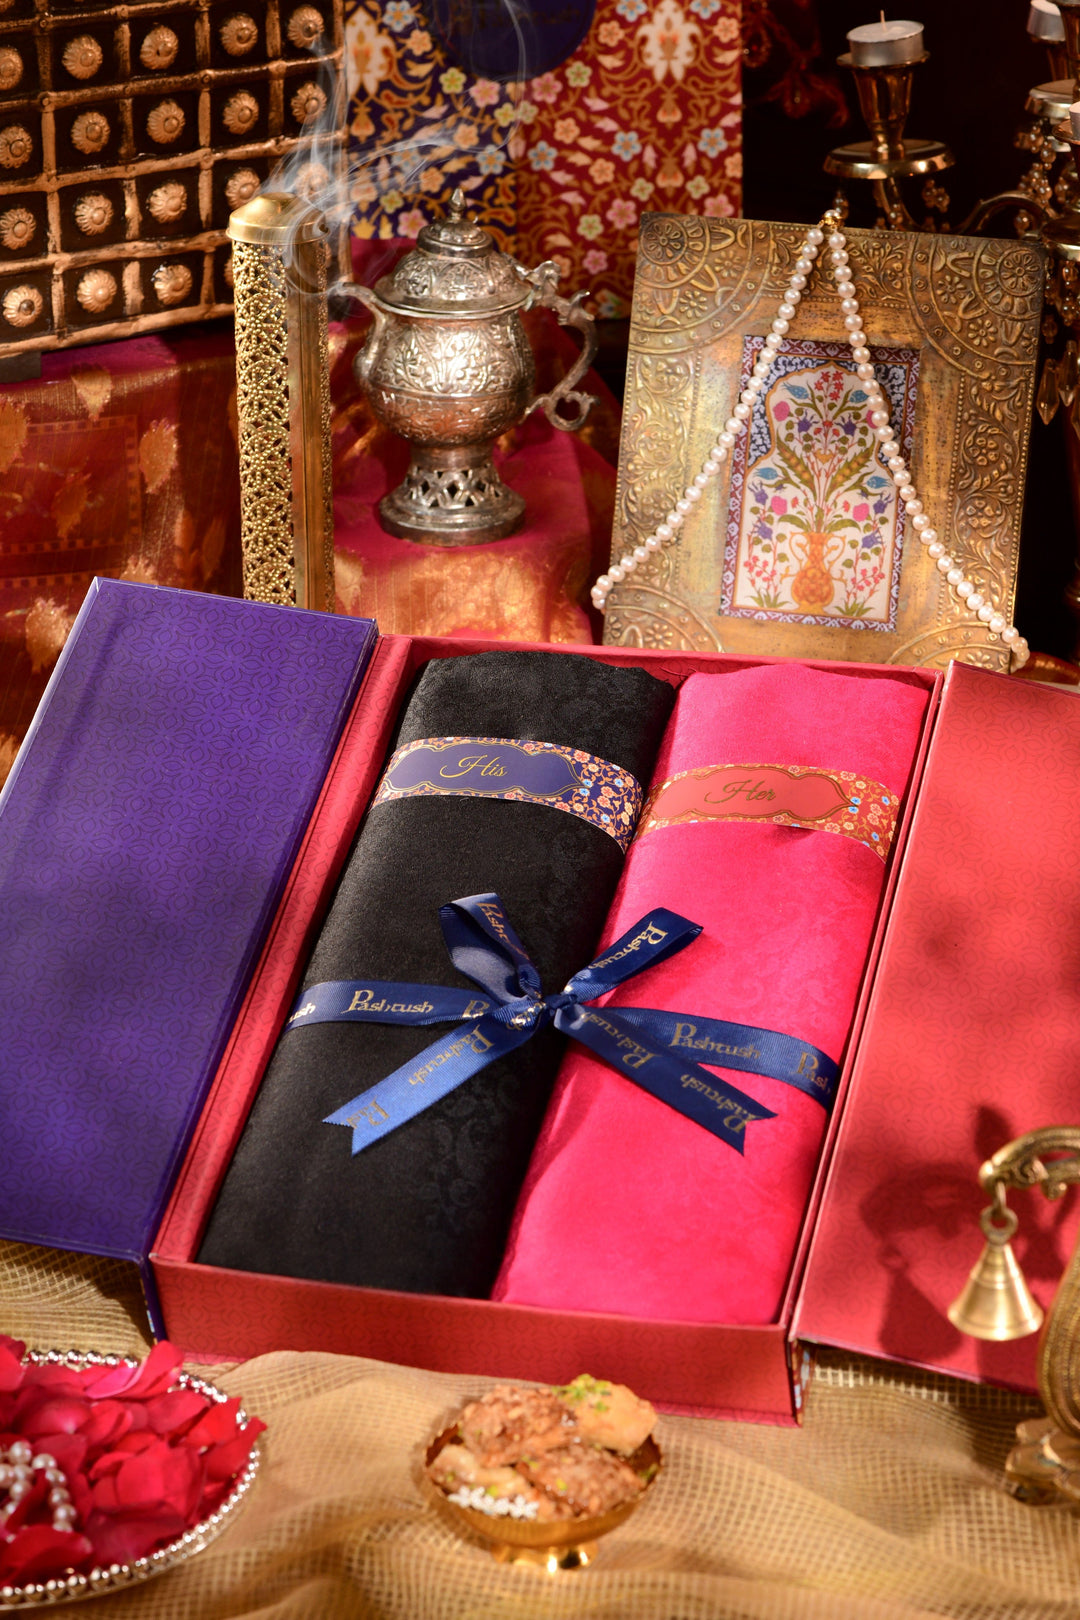 Pashtush India Gift Pack Pashtush His And Her Gift Set Of Reversible Self Design Stoles With Premium Gift Box Packaging, Black and Neon Pink